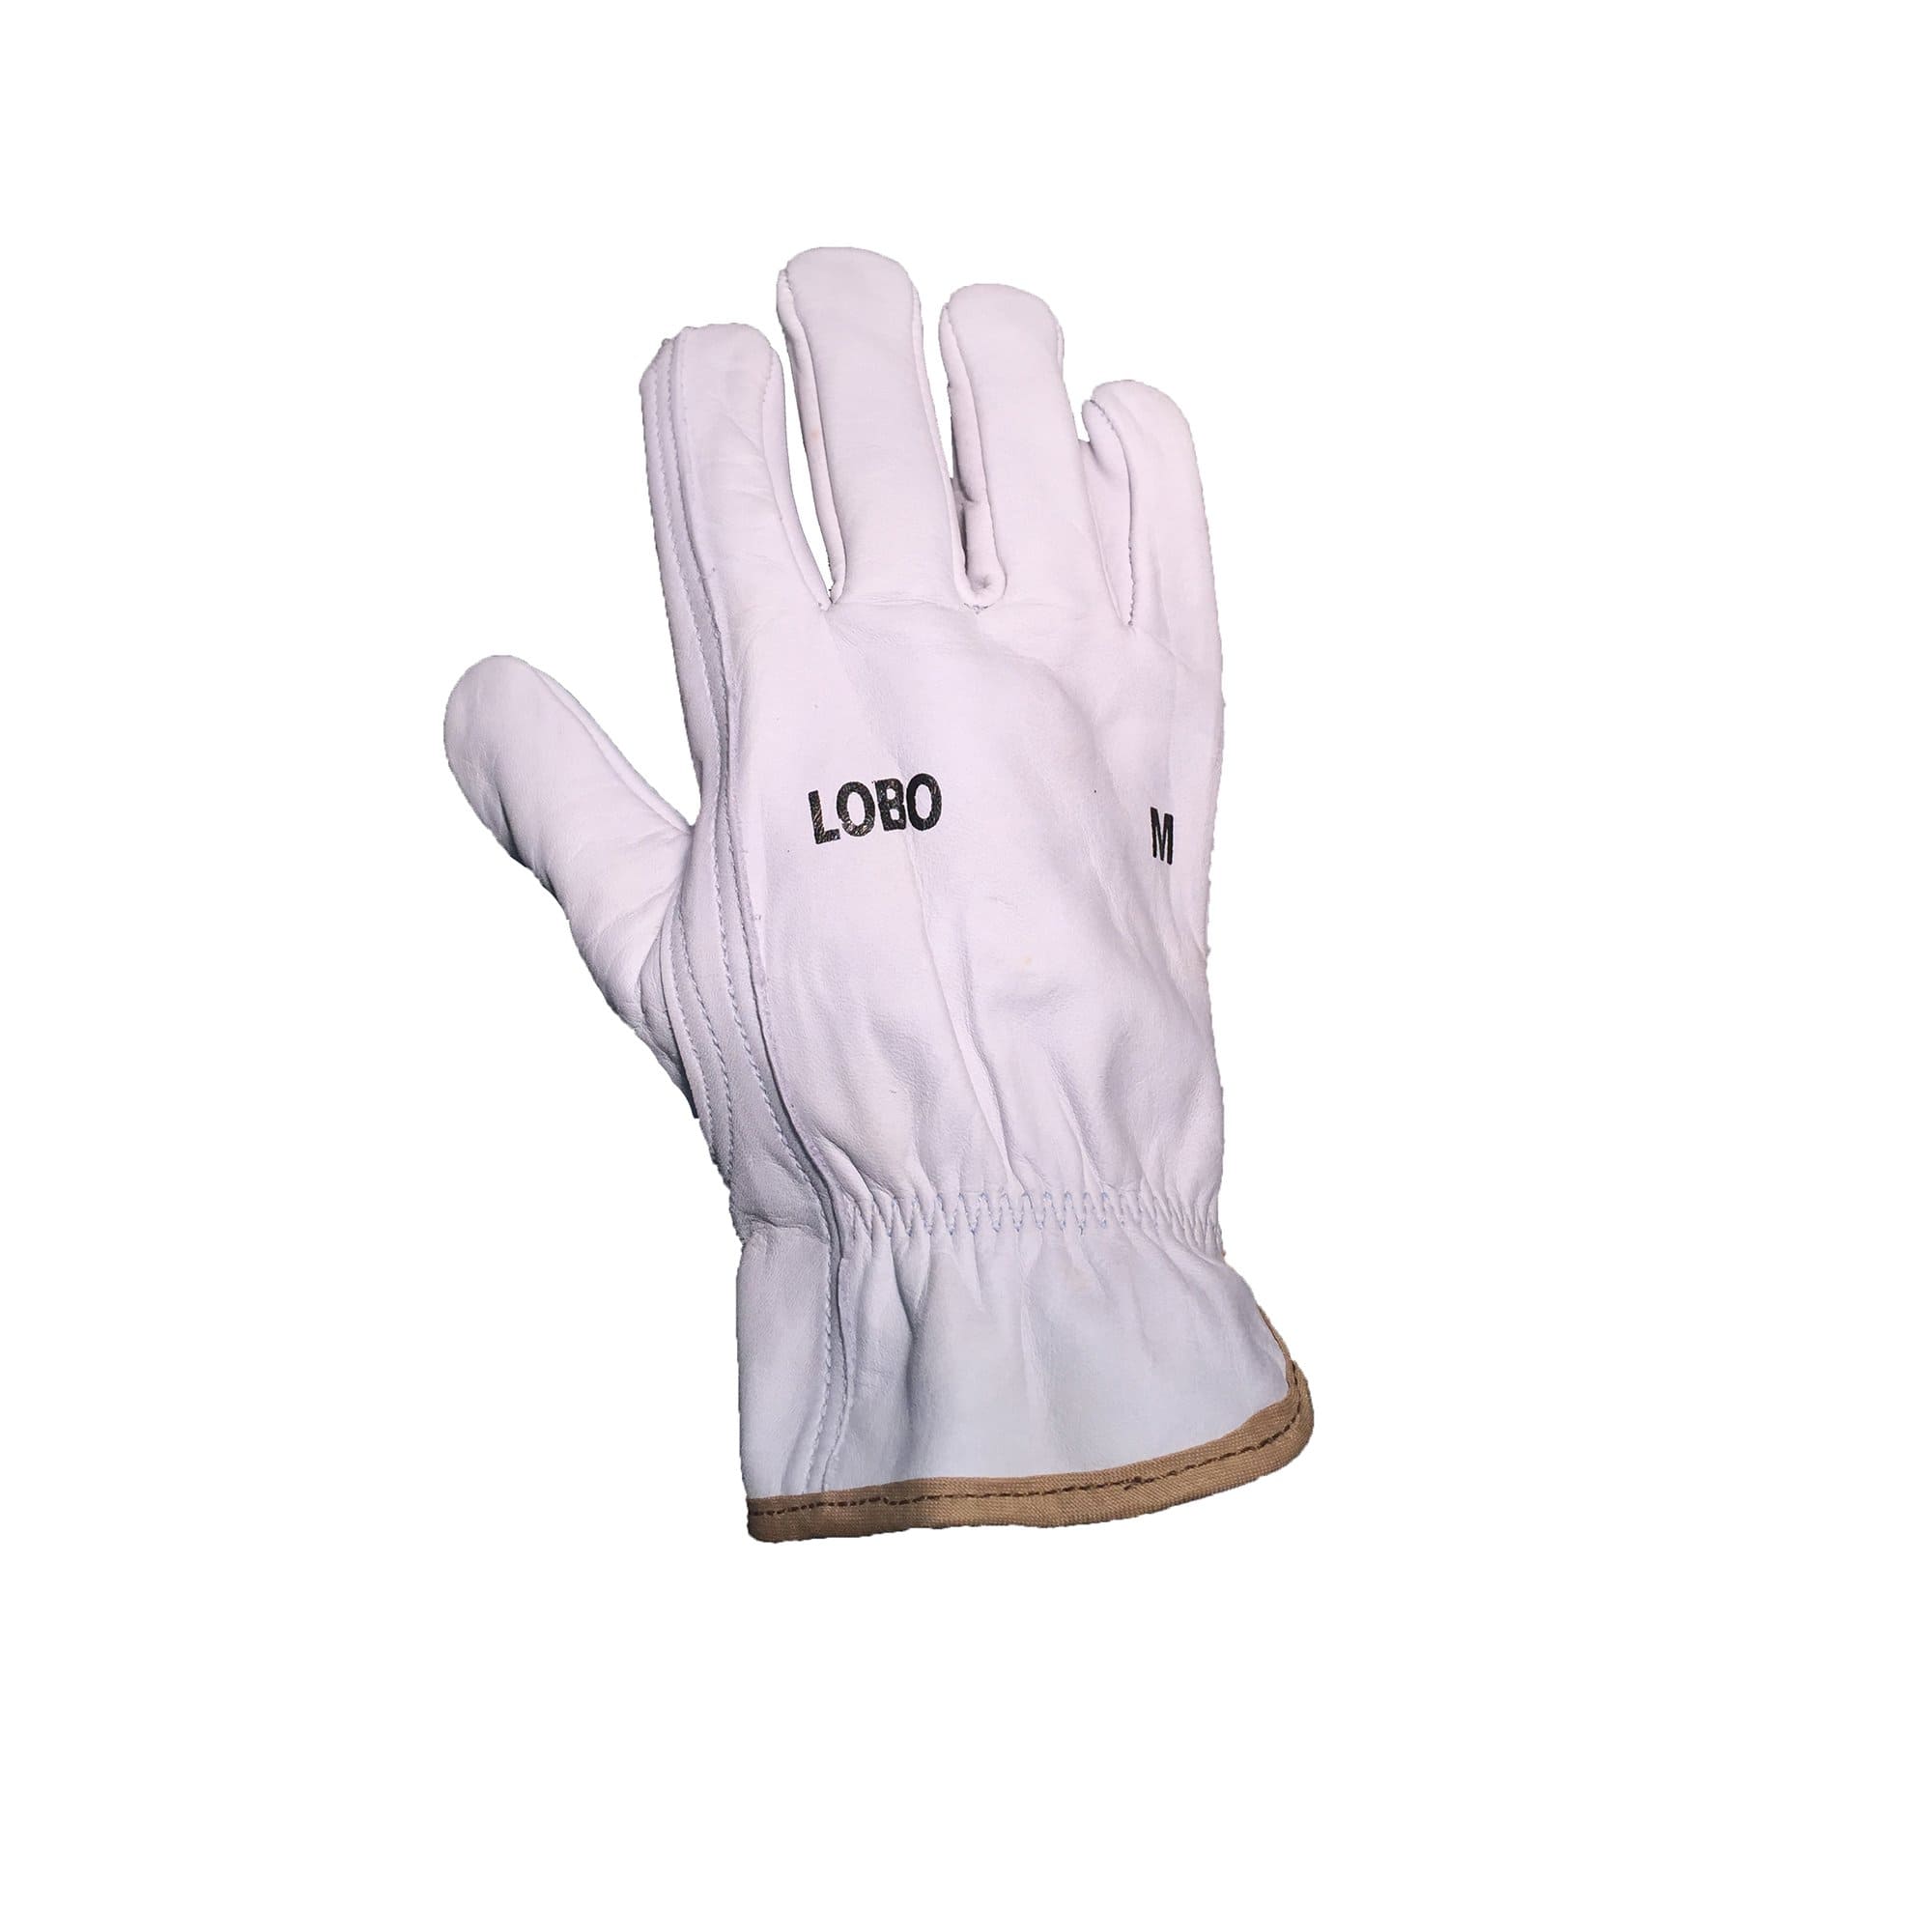 Lobo leather driver gloves - cowhide leather